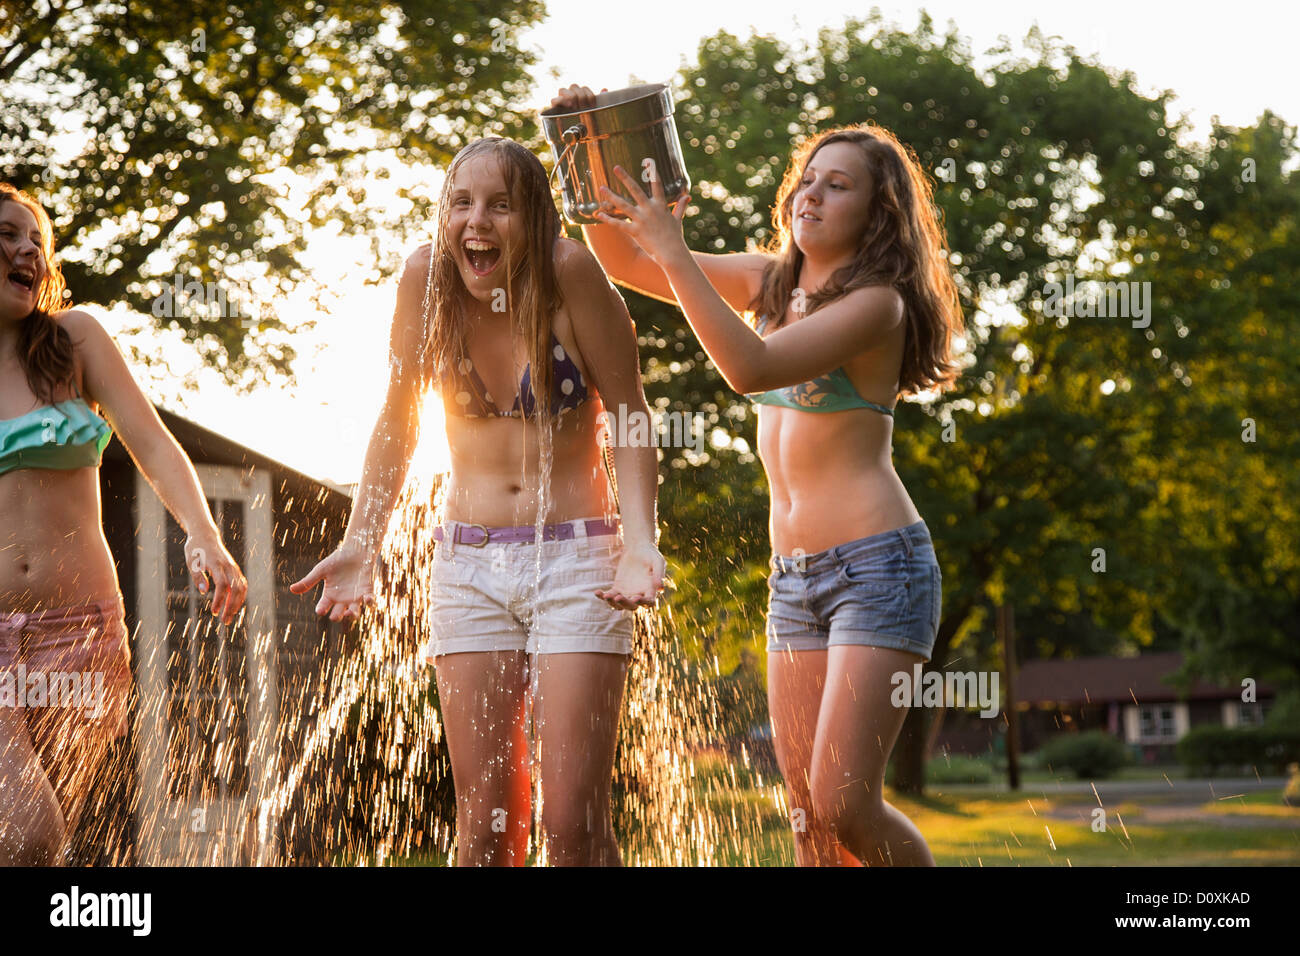 Girl pouring bucket of water over friend's head Stock Photo